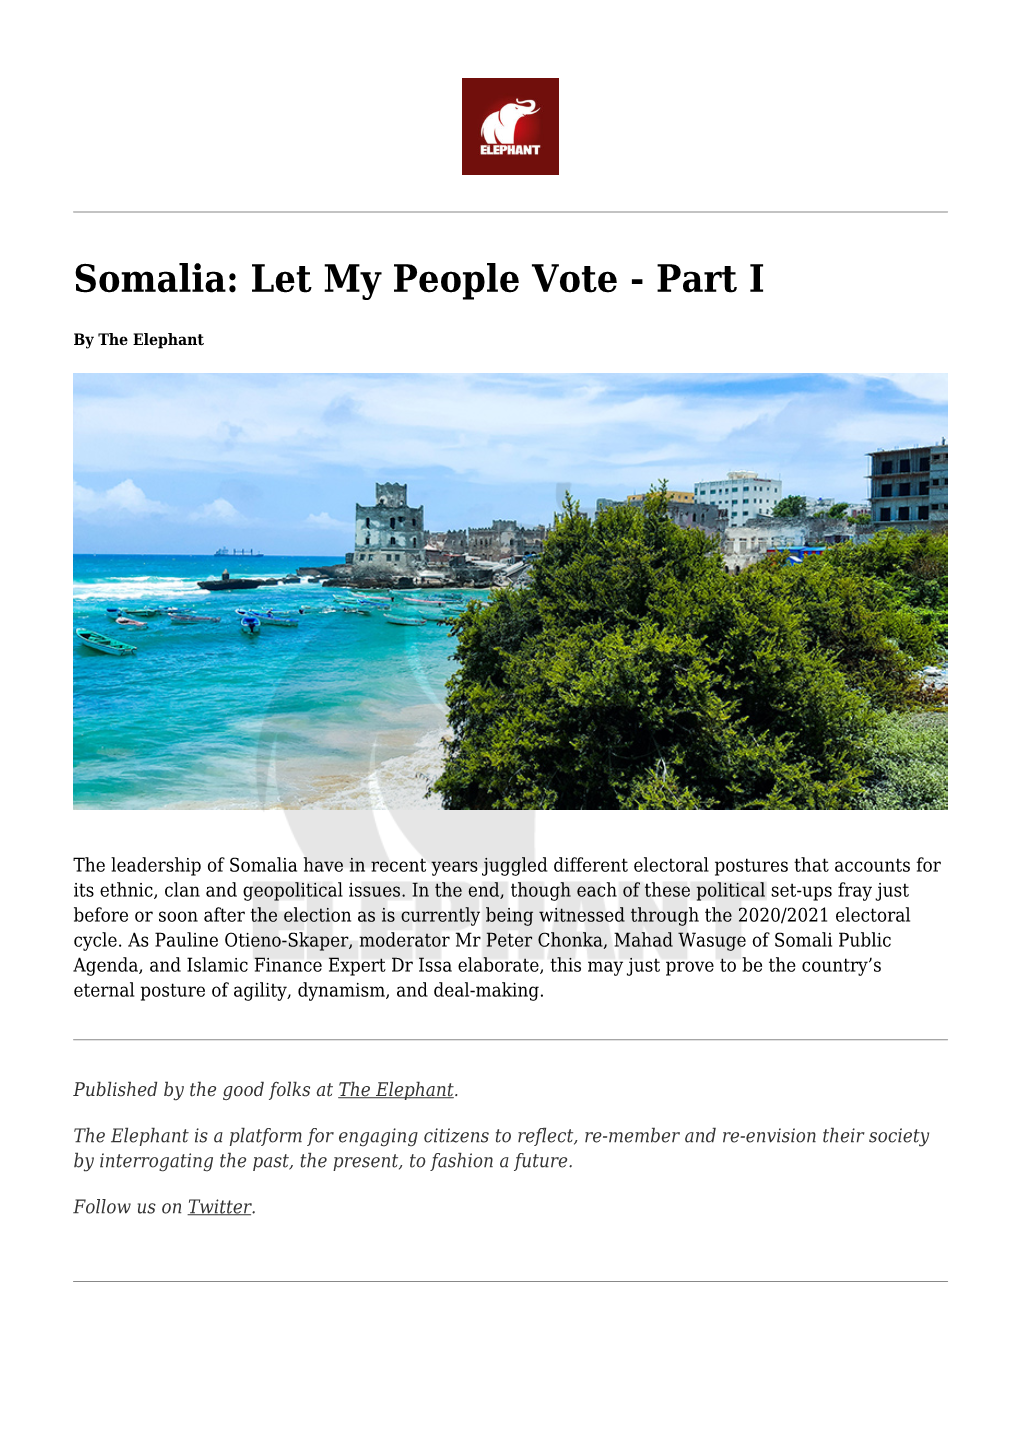 Changing Gulf Dynamics in Somalia's Upcoming Elections,The 'Othering